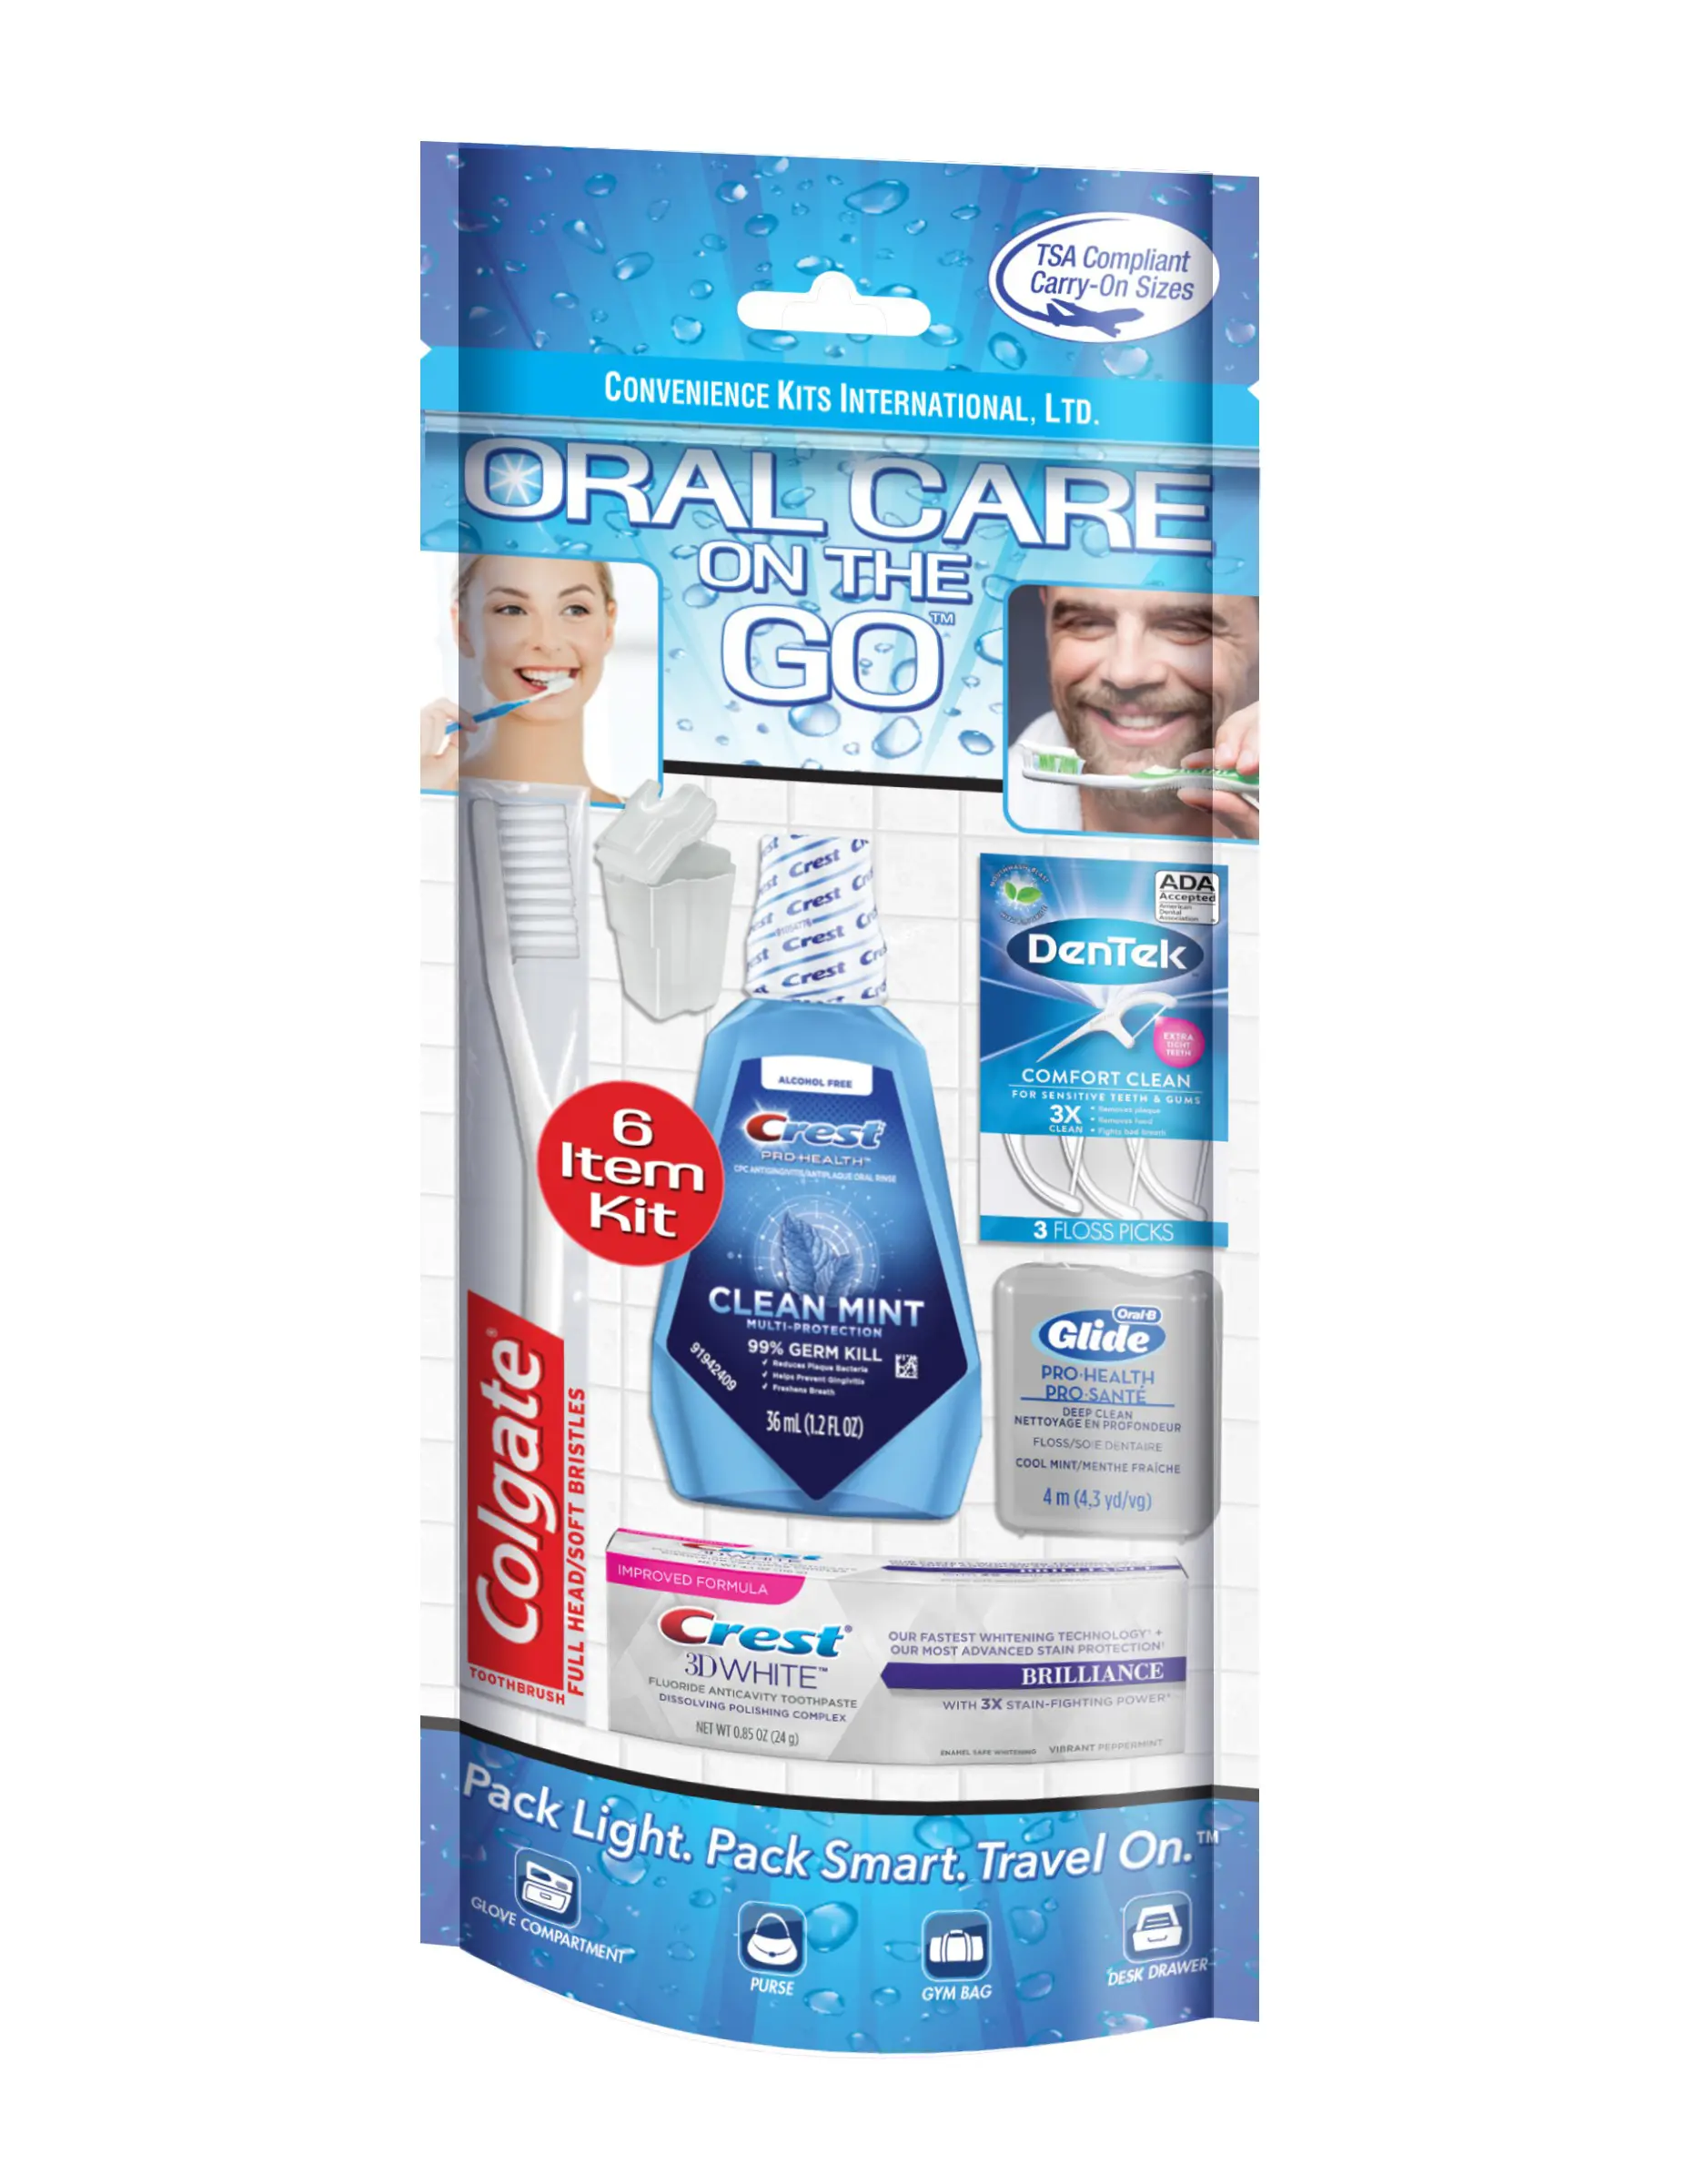 Affordable oral care supplies